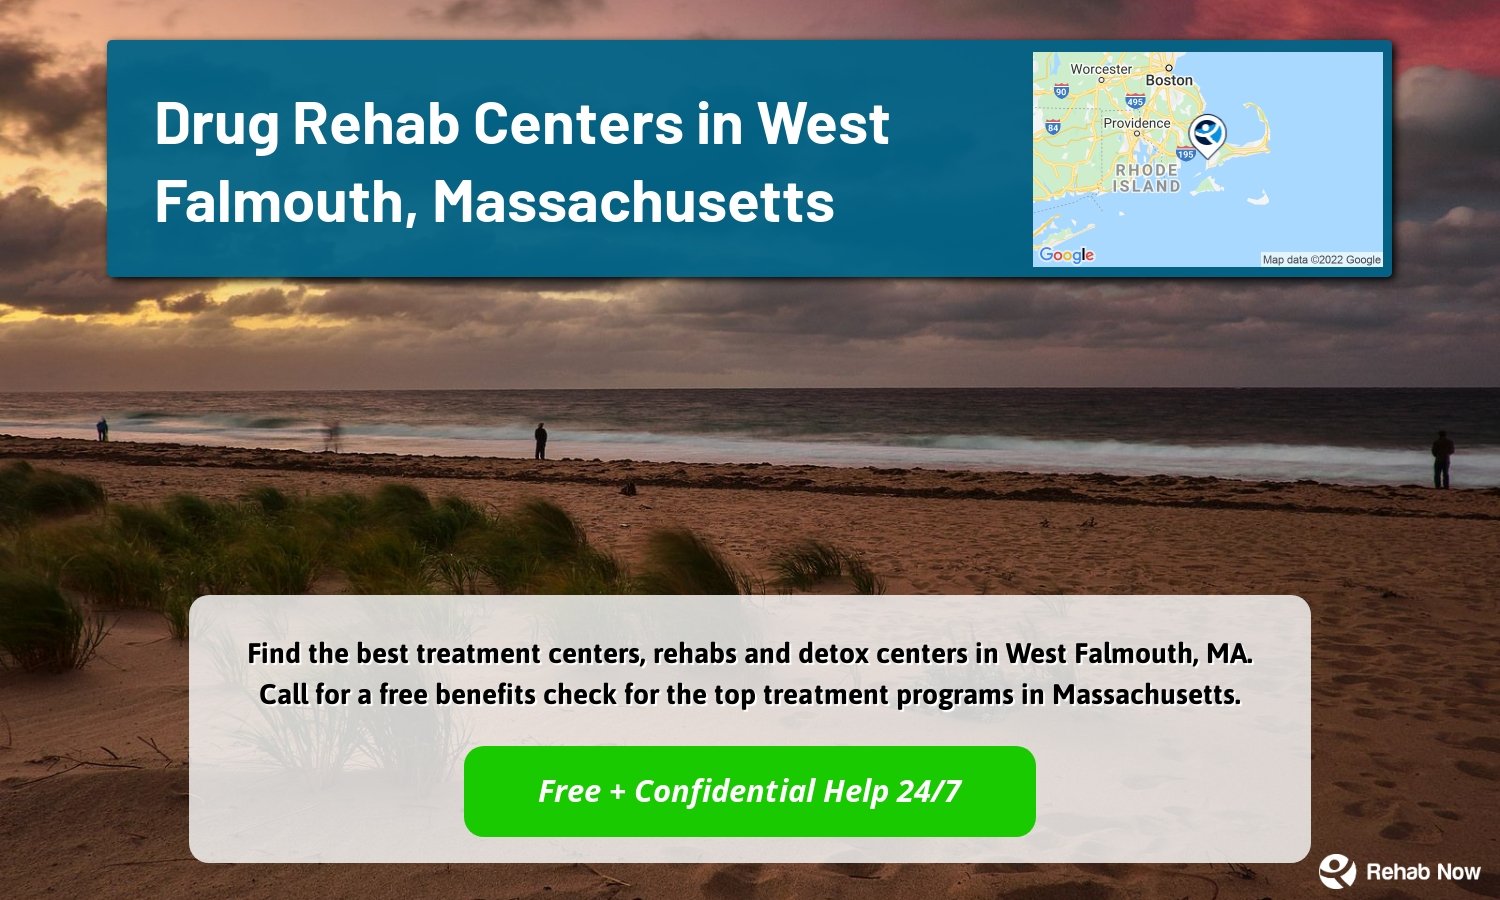 Find the best treatment centers, rehabs and detox centers in West Falmouth, MA. Call for a free benefits check for the top treatment programs in Massachusetts.